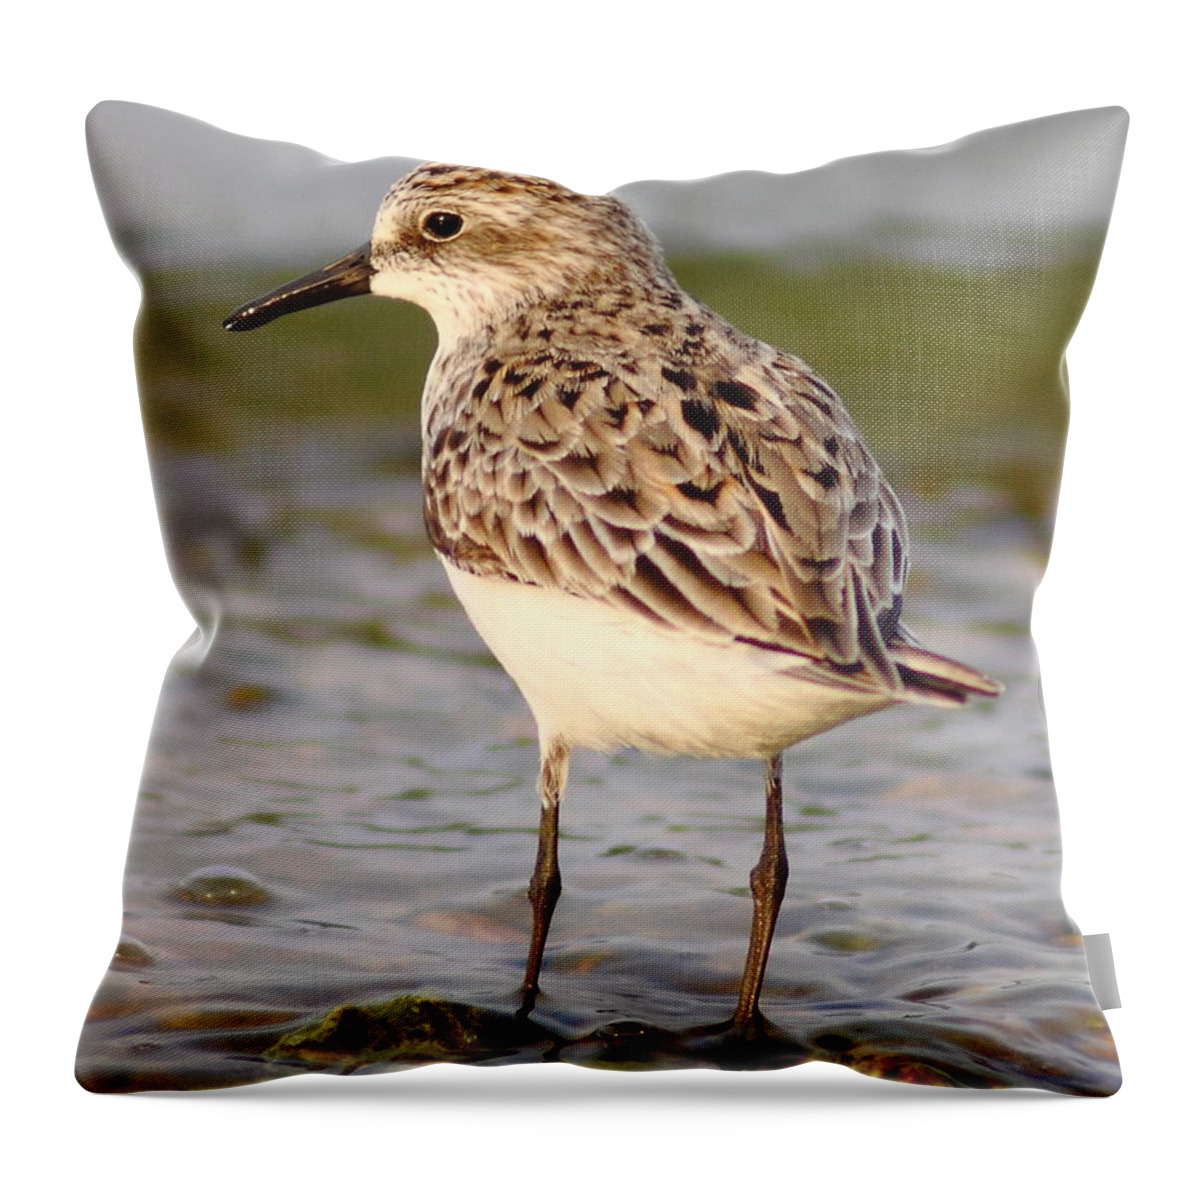 Animal Throw Pillow featuring the photograph Sandpiper Portrait by Robert Frederick